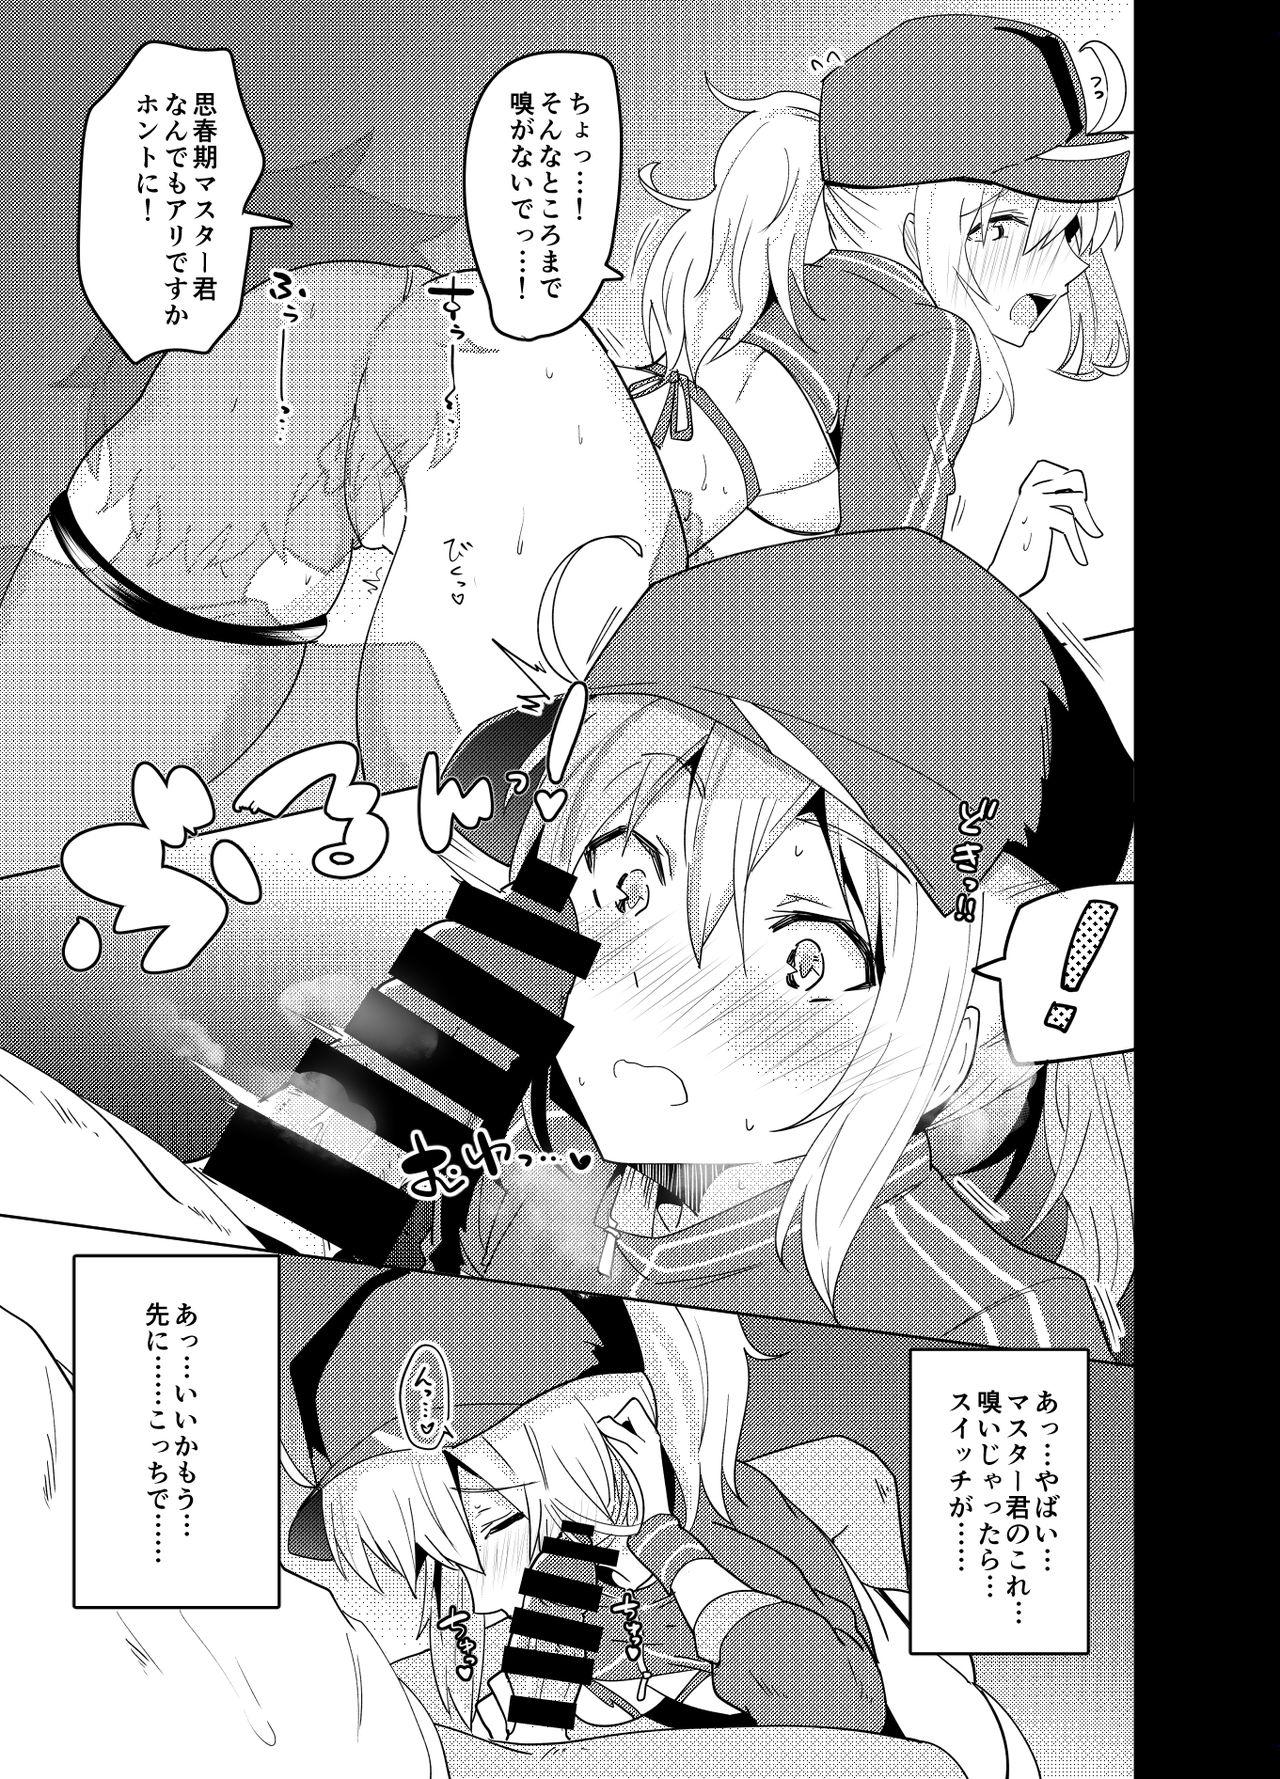 Chile Dosukebe Saber Wars 3 - Fate grand order Gay Trimmed - Page 9